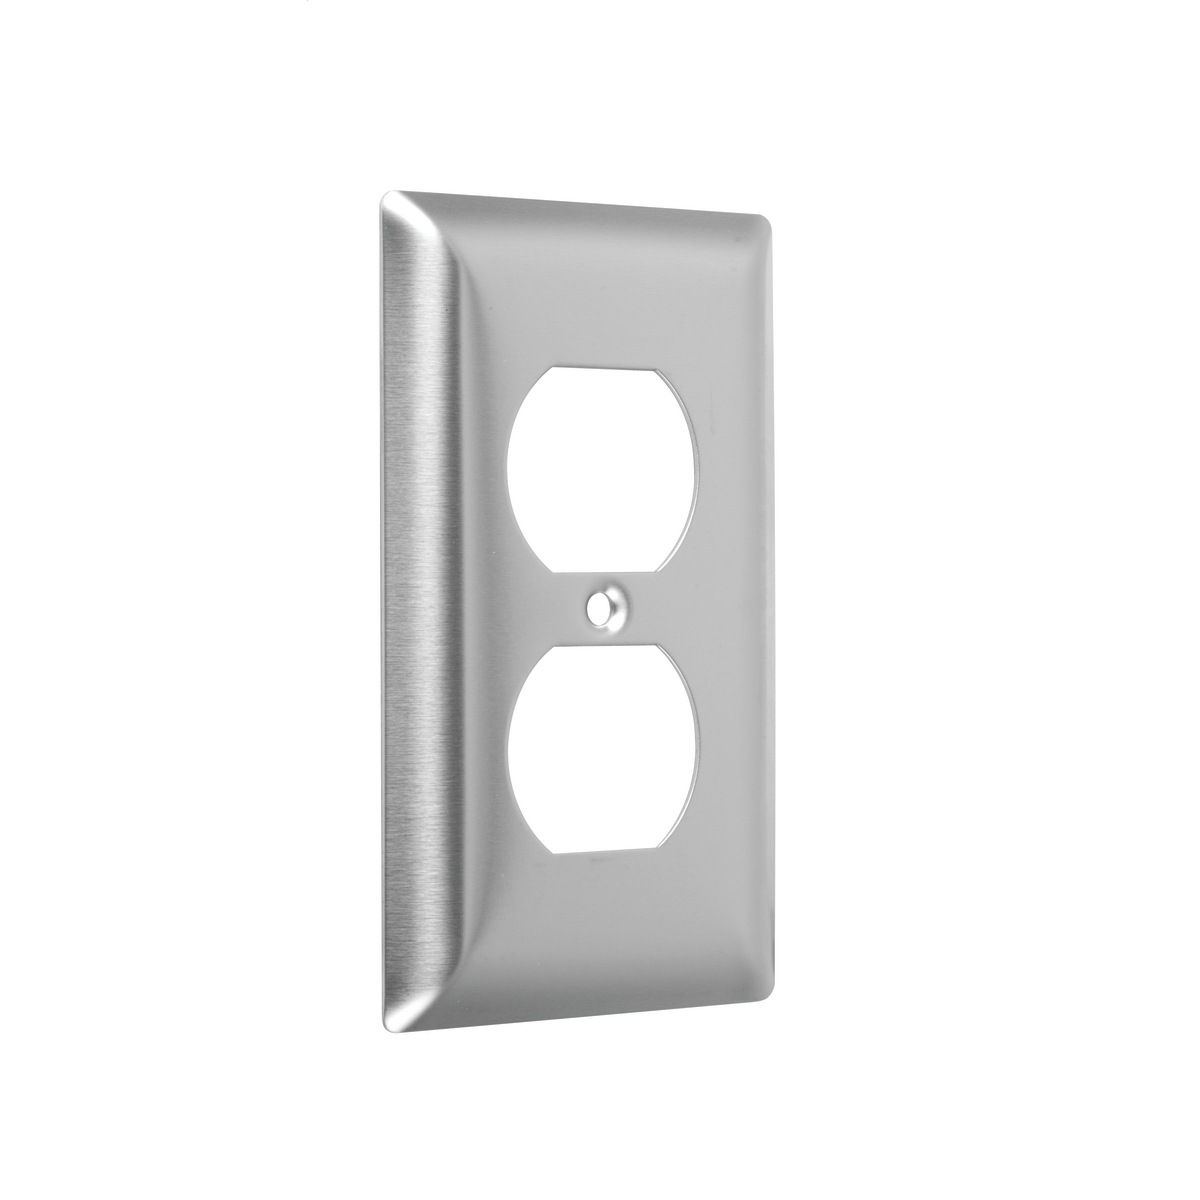 Ivory Smooth TayMac WI-DD Standard Metallic Wallplate with Two Duplex Receptacle Type Two Gang 